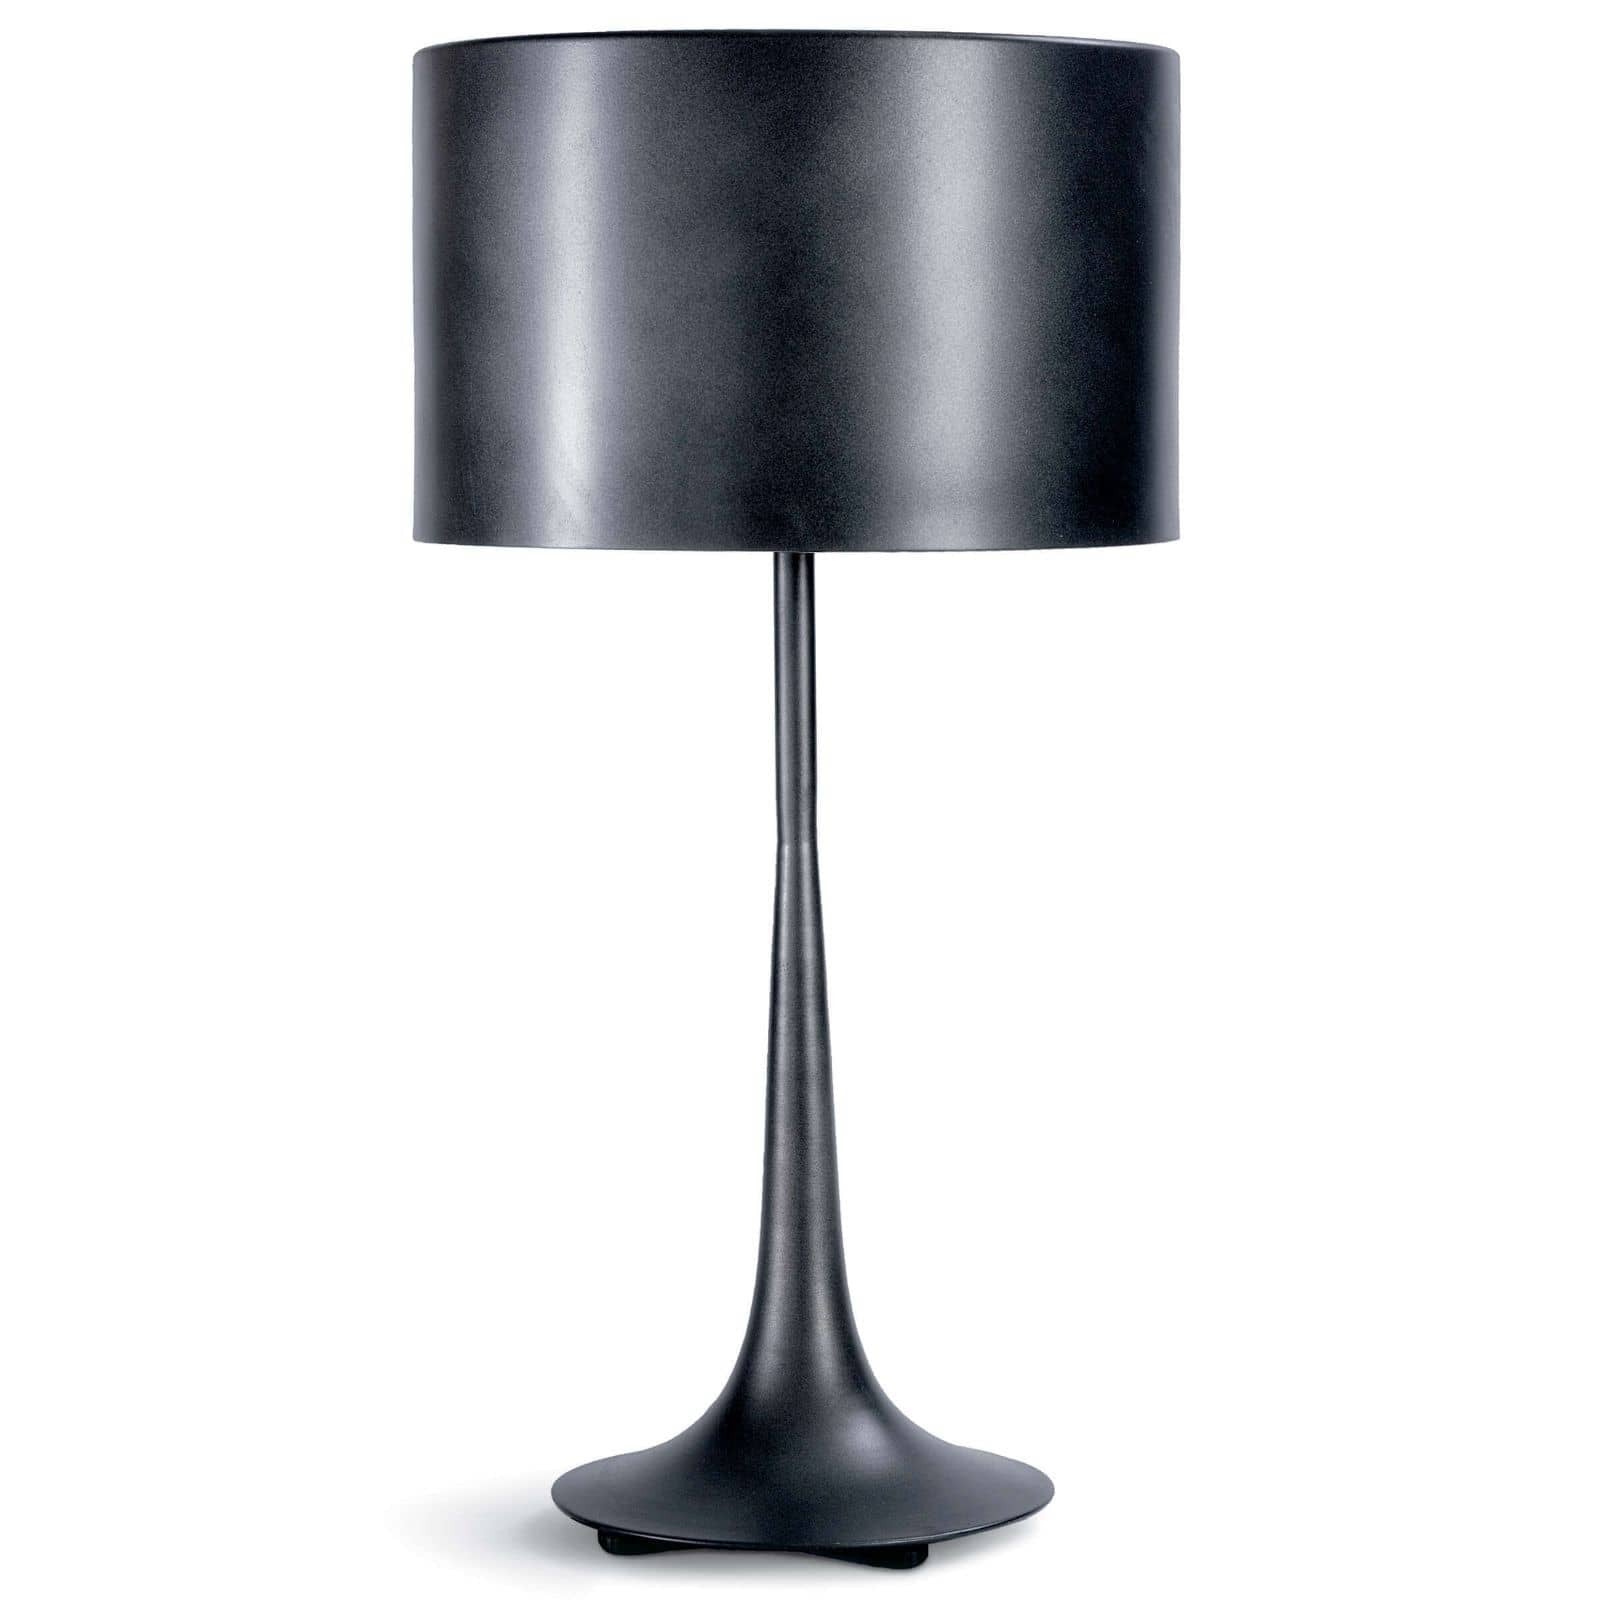 Blending grace and power, the Trilogy Table Lamp uses a tapered base with coordinating shade to provide a versatile solution for your living room, bedroom or entryway. Perfect for those who love minimalist decor or an urban feel to their interiors.   Overall Dimensions: 15.25"w x 15.25"d x 30.5"h